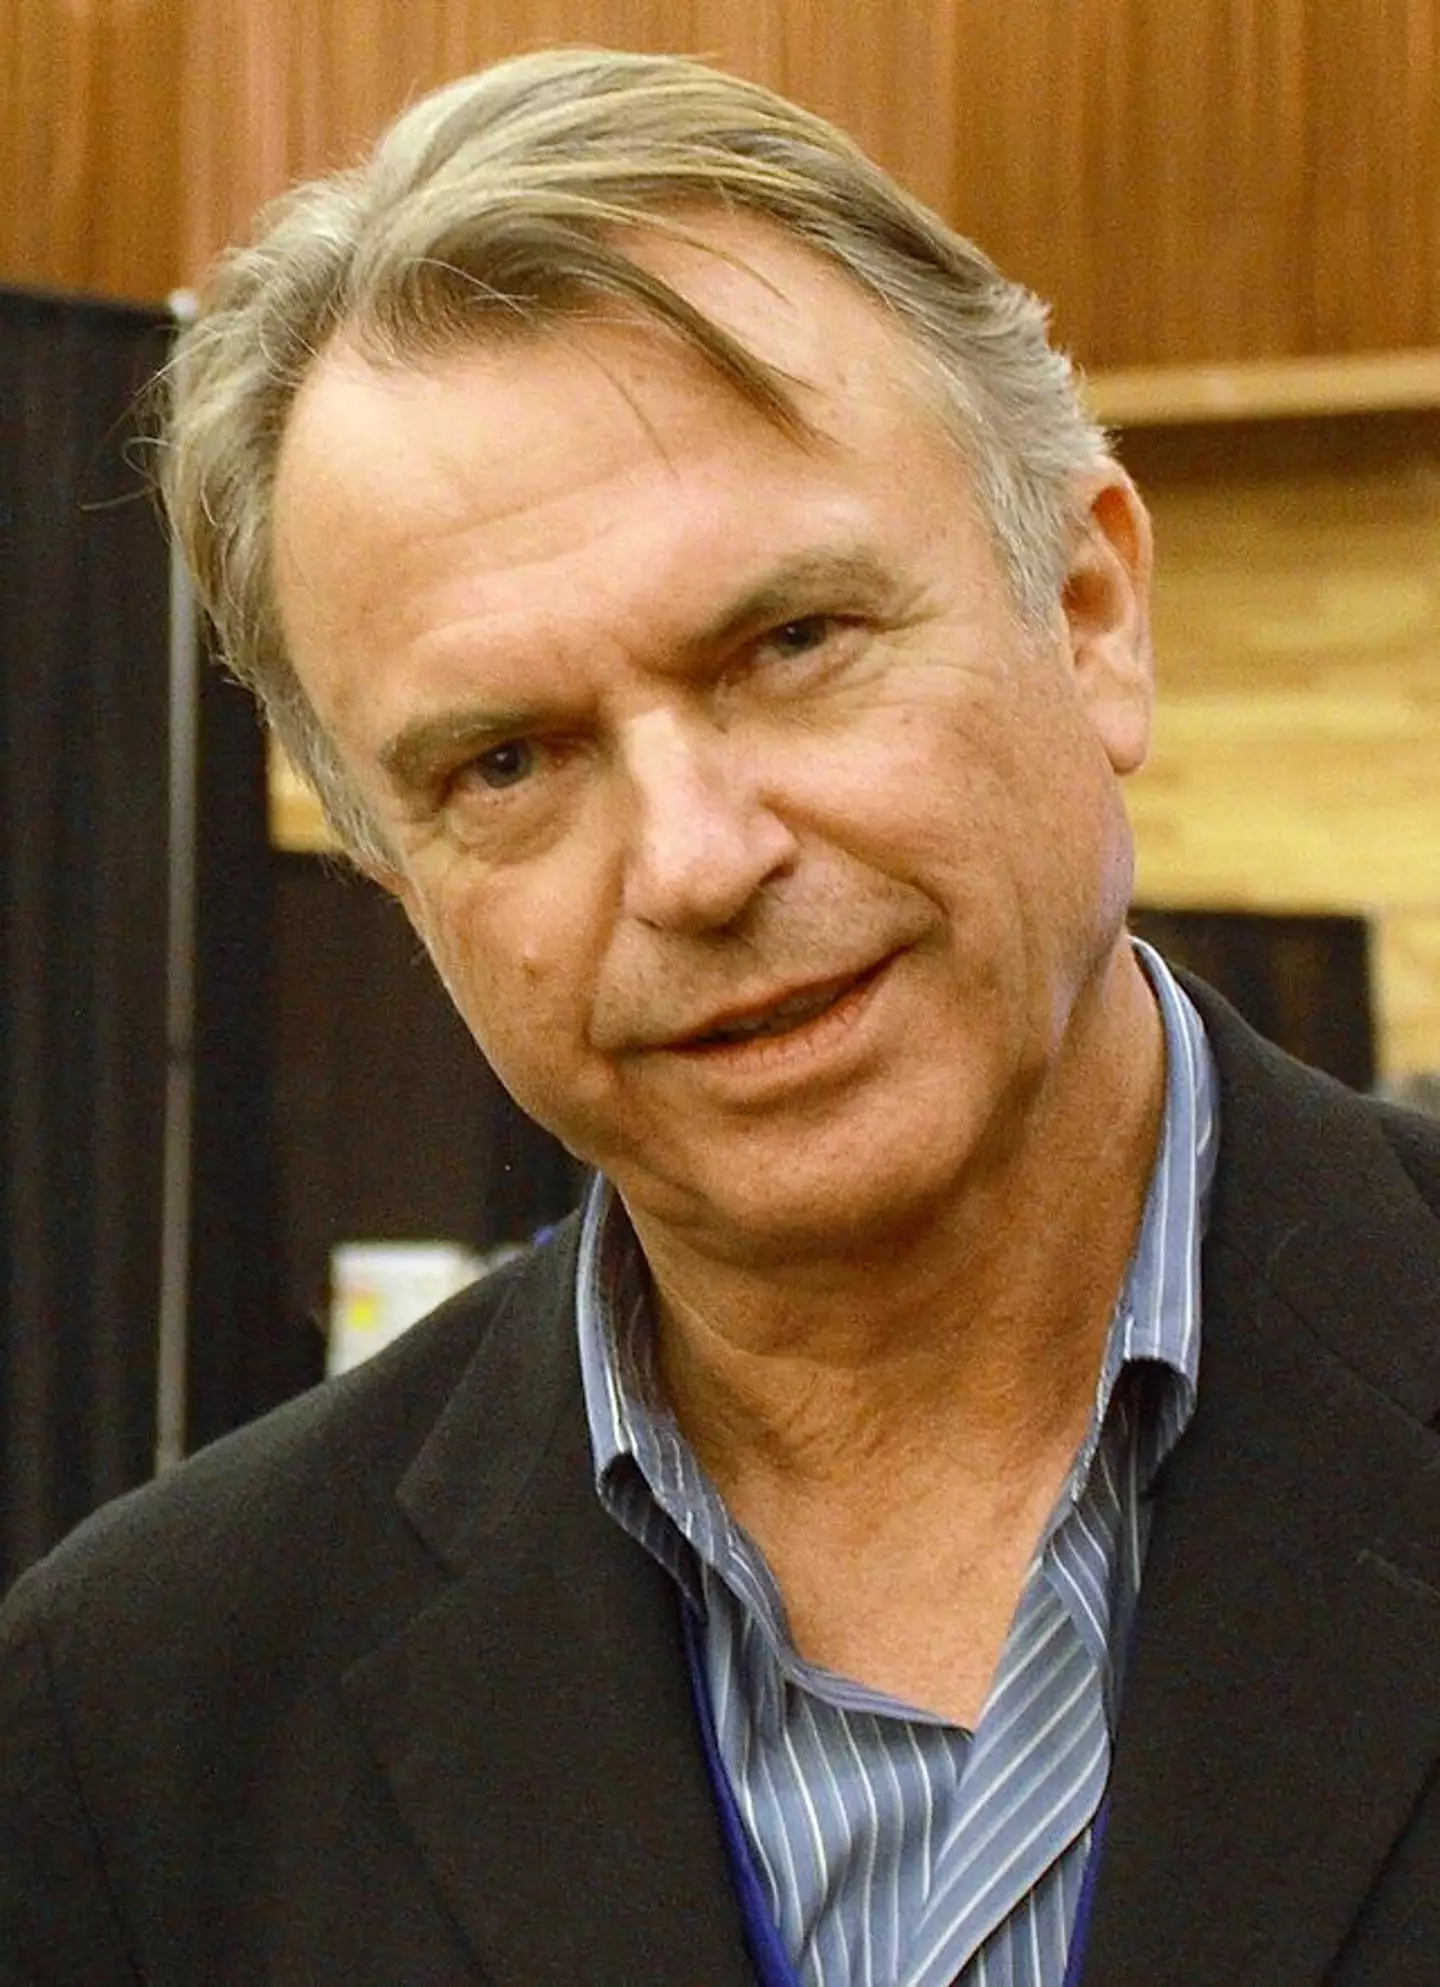 Sam Neill opened up about his cancer battle.